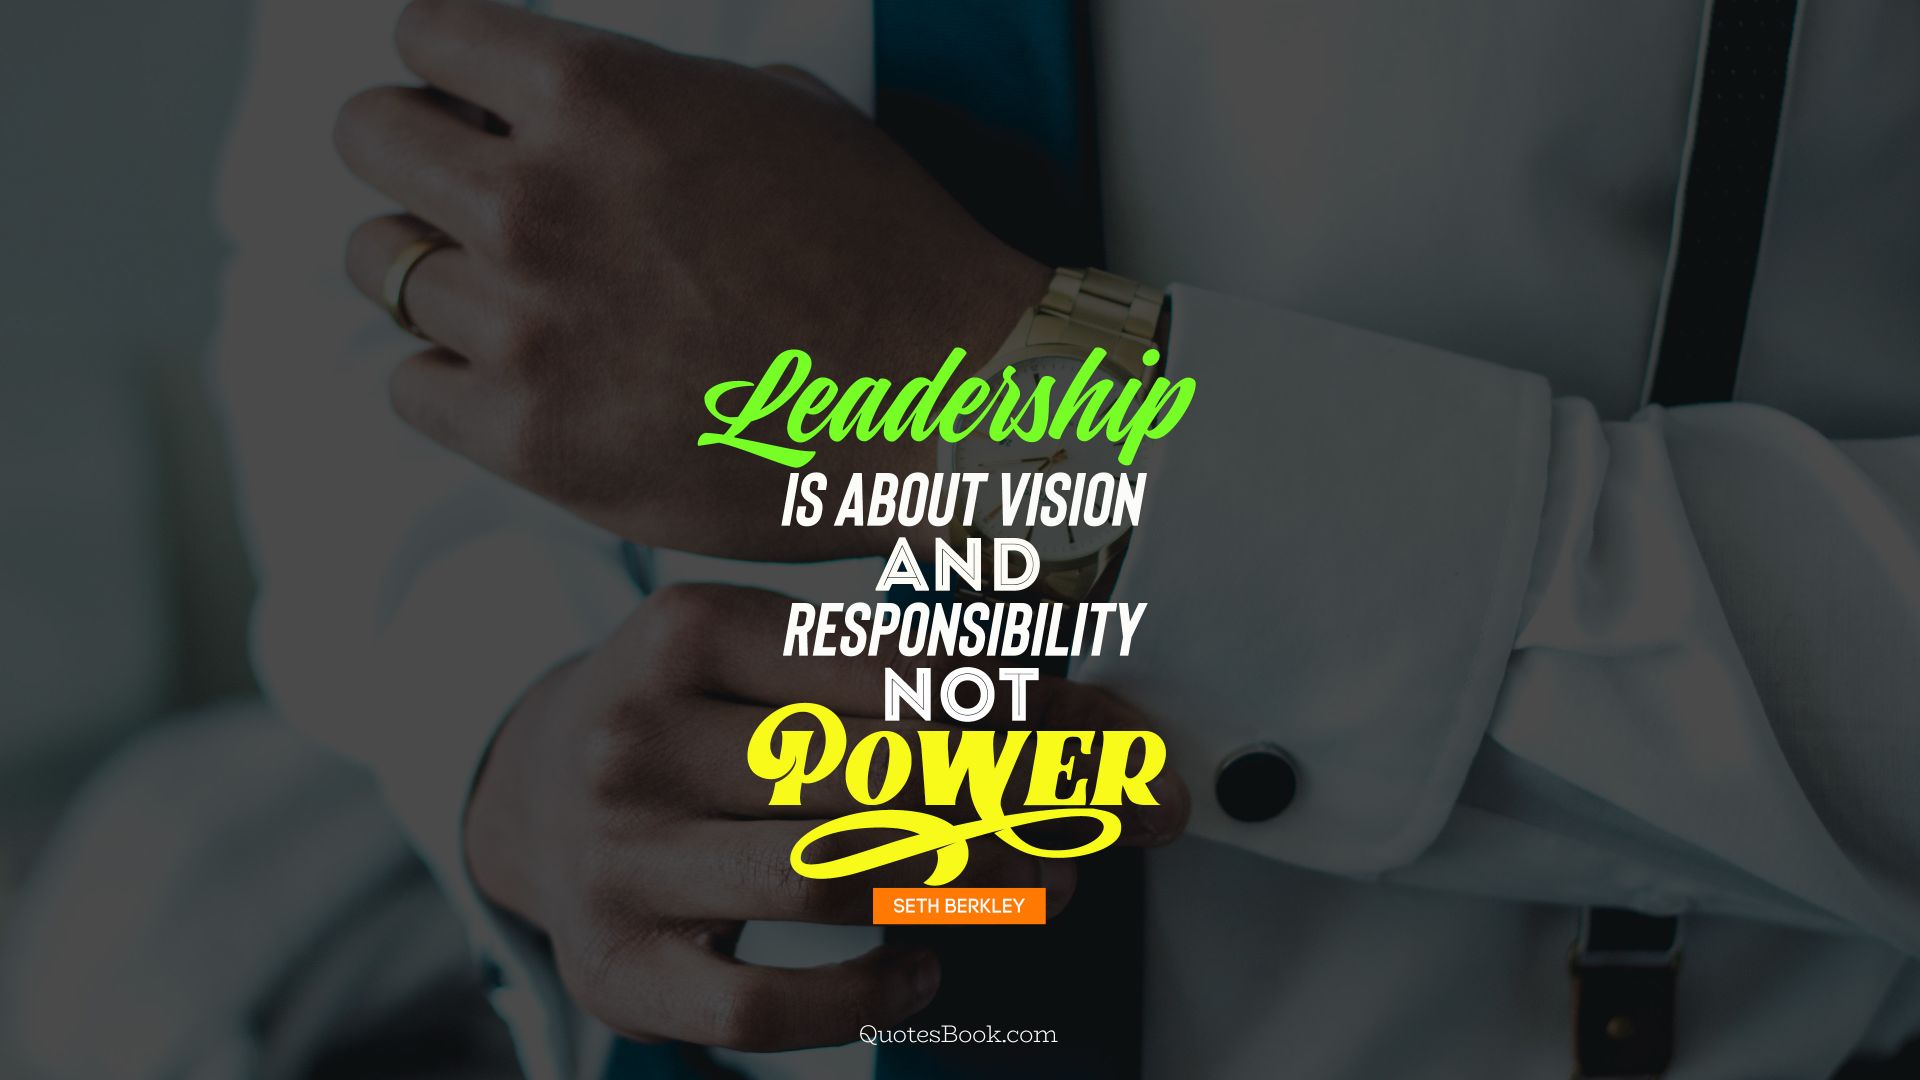 leadership is about vision and responsibility not power. - Quote by Seth Berkley